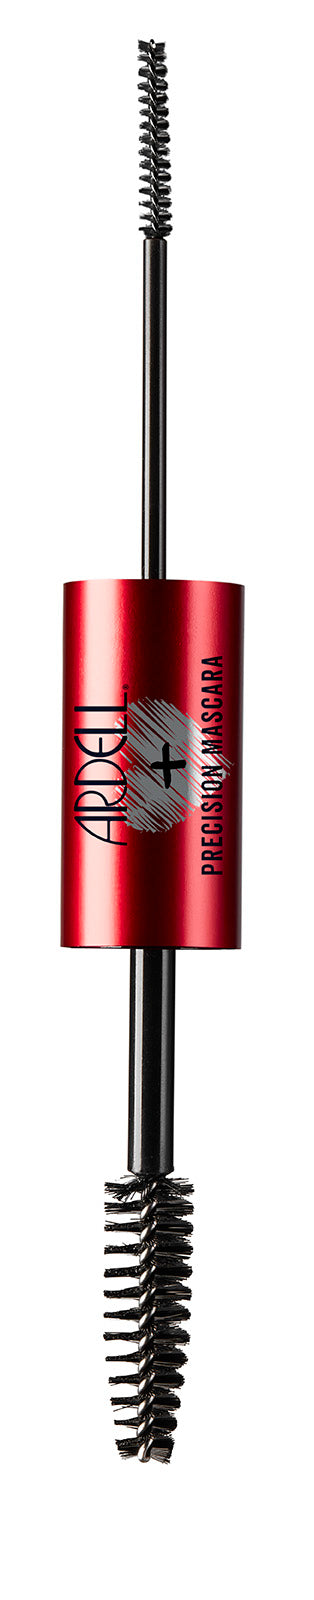 Capped bottle of Ardell Top Bottom Precision Mascara Black standing upright in a white color setting